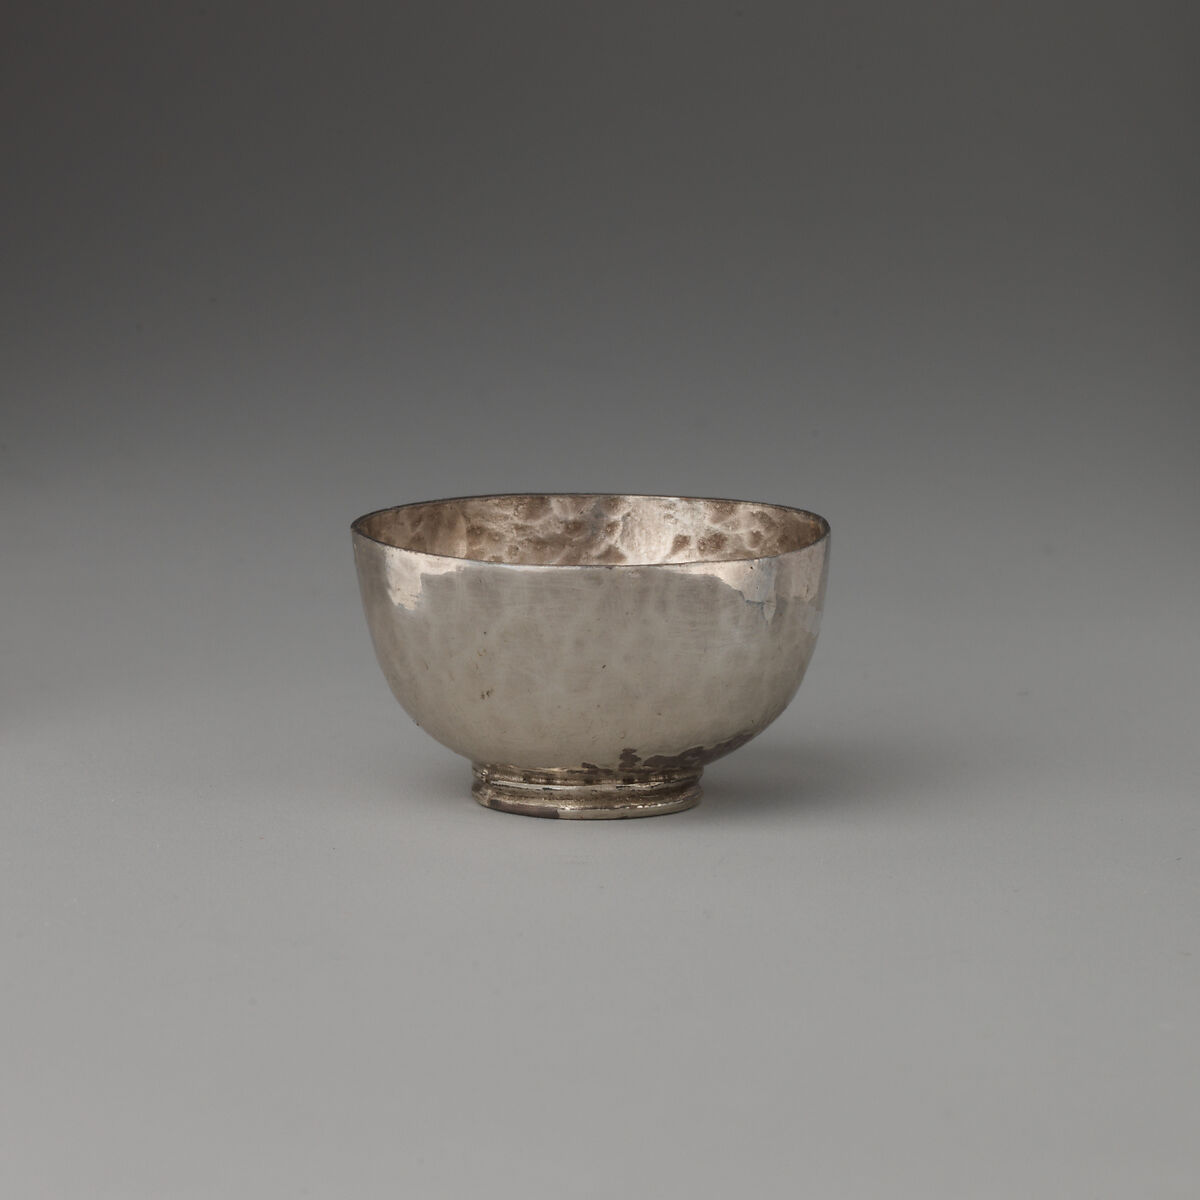 Miniature bowl, Possibly by George Manjoy (British, active 1685–ca. 1720), Silver, British, London 